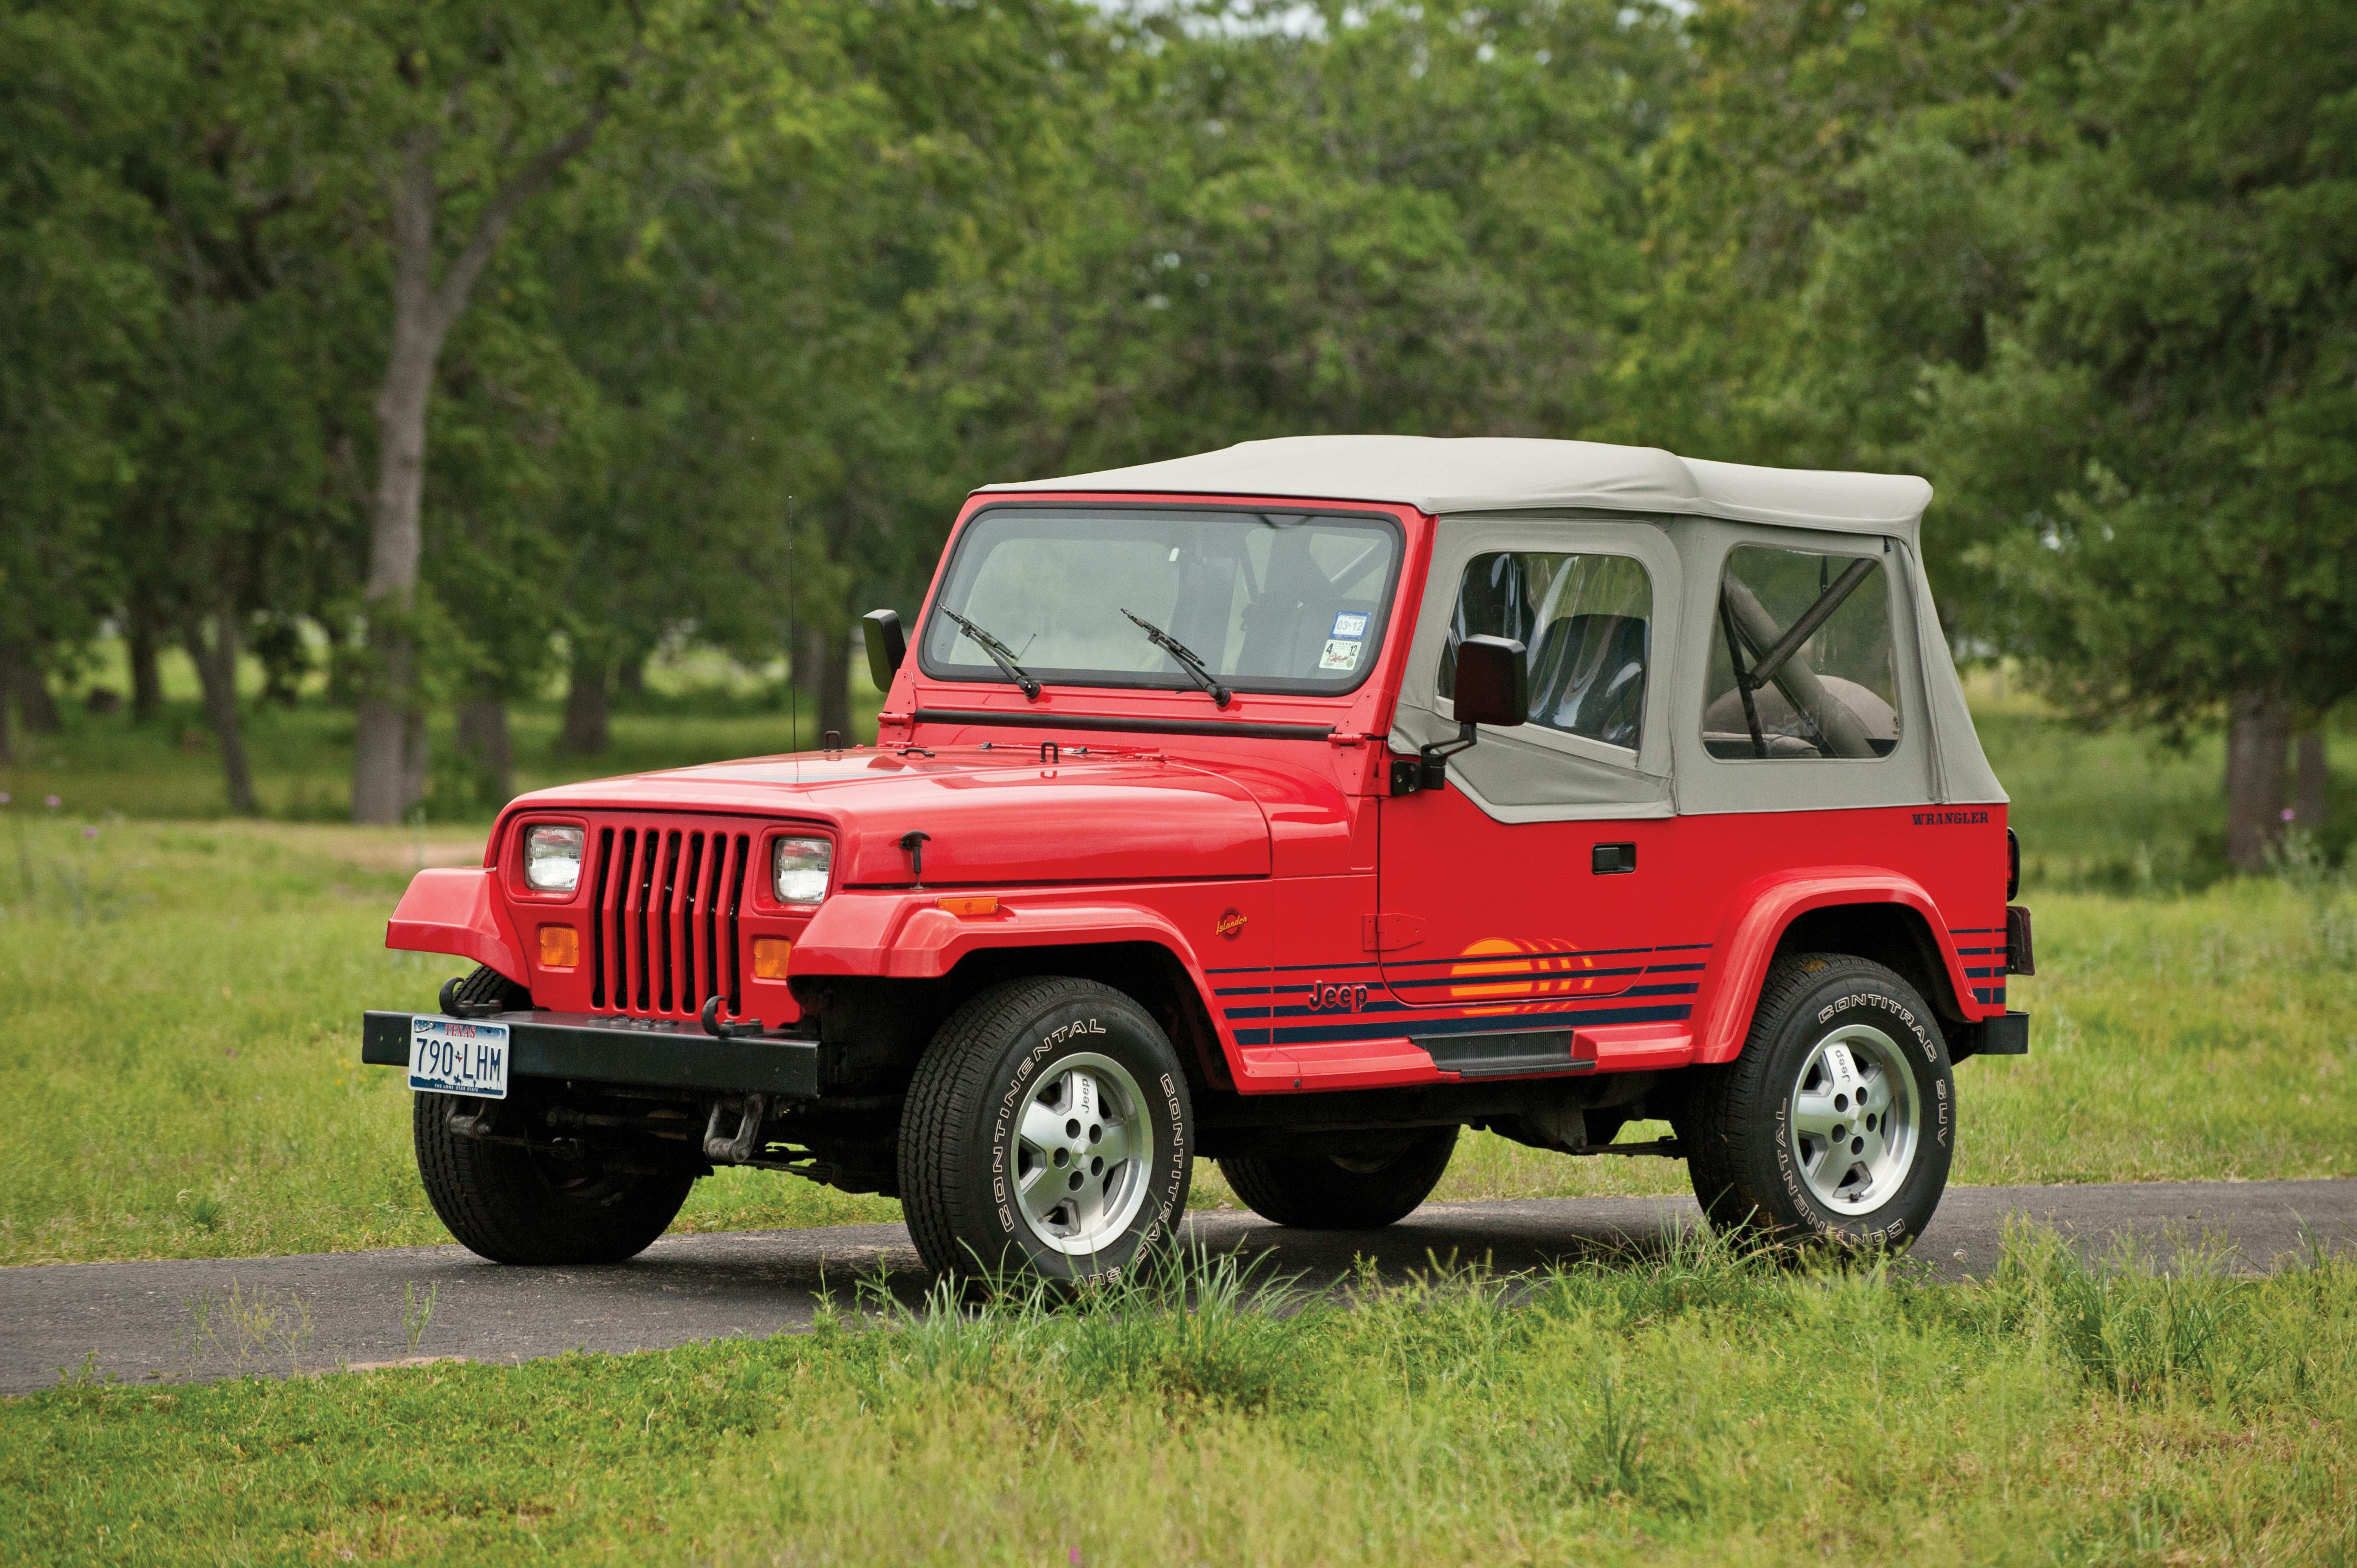 1993 Jeep Wrangler Renegade | Hagerty Valuation Tools